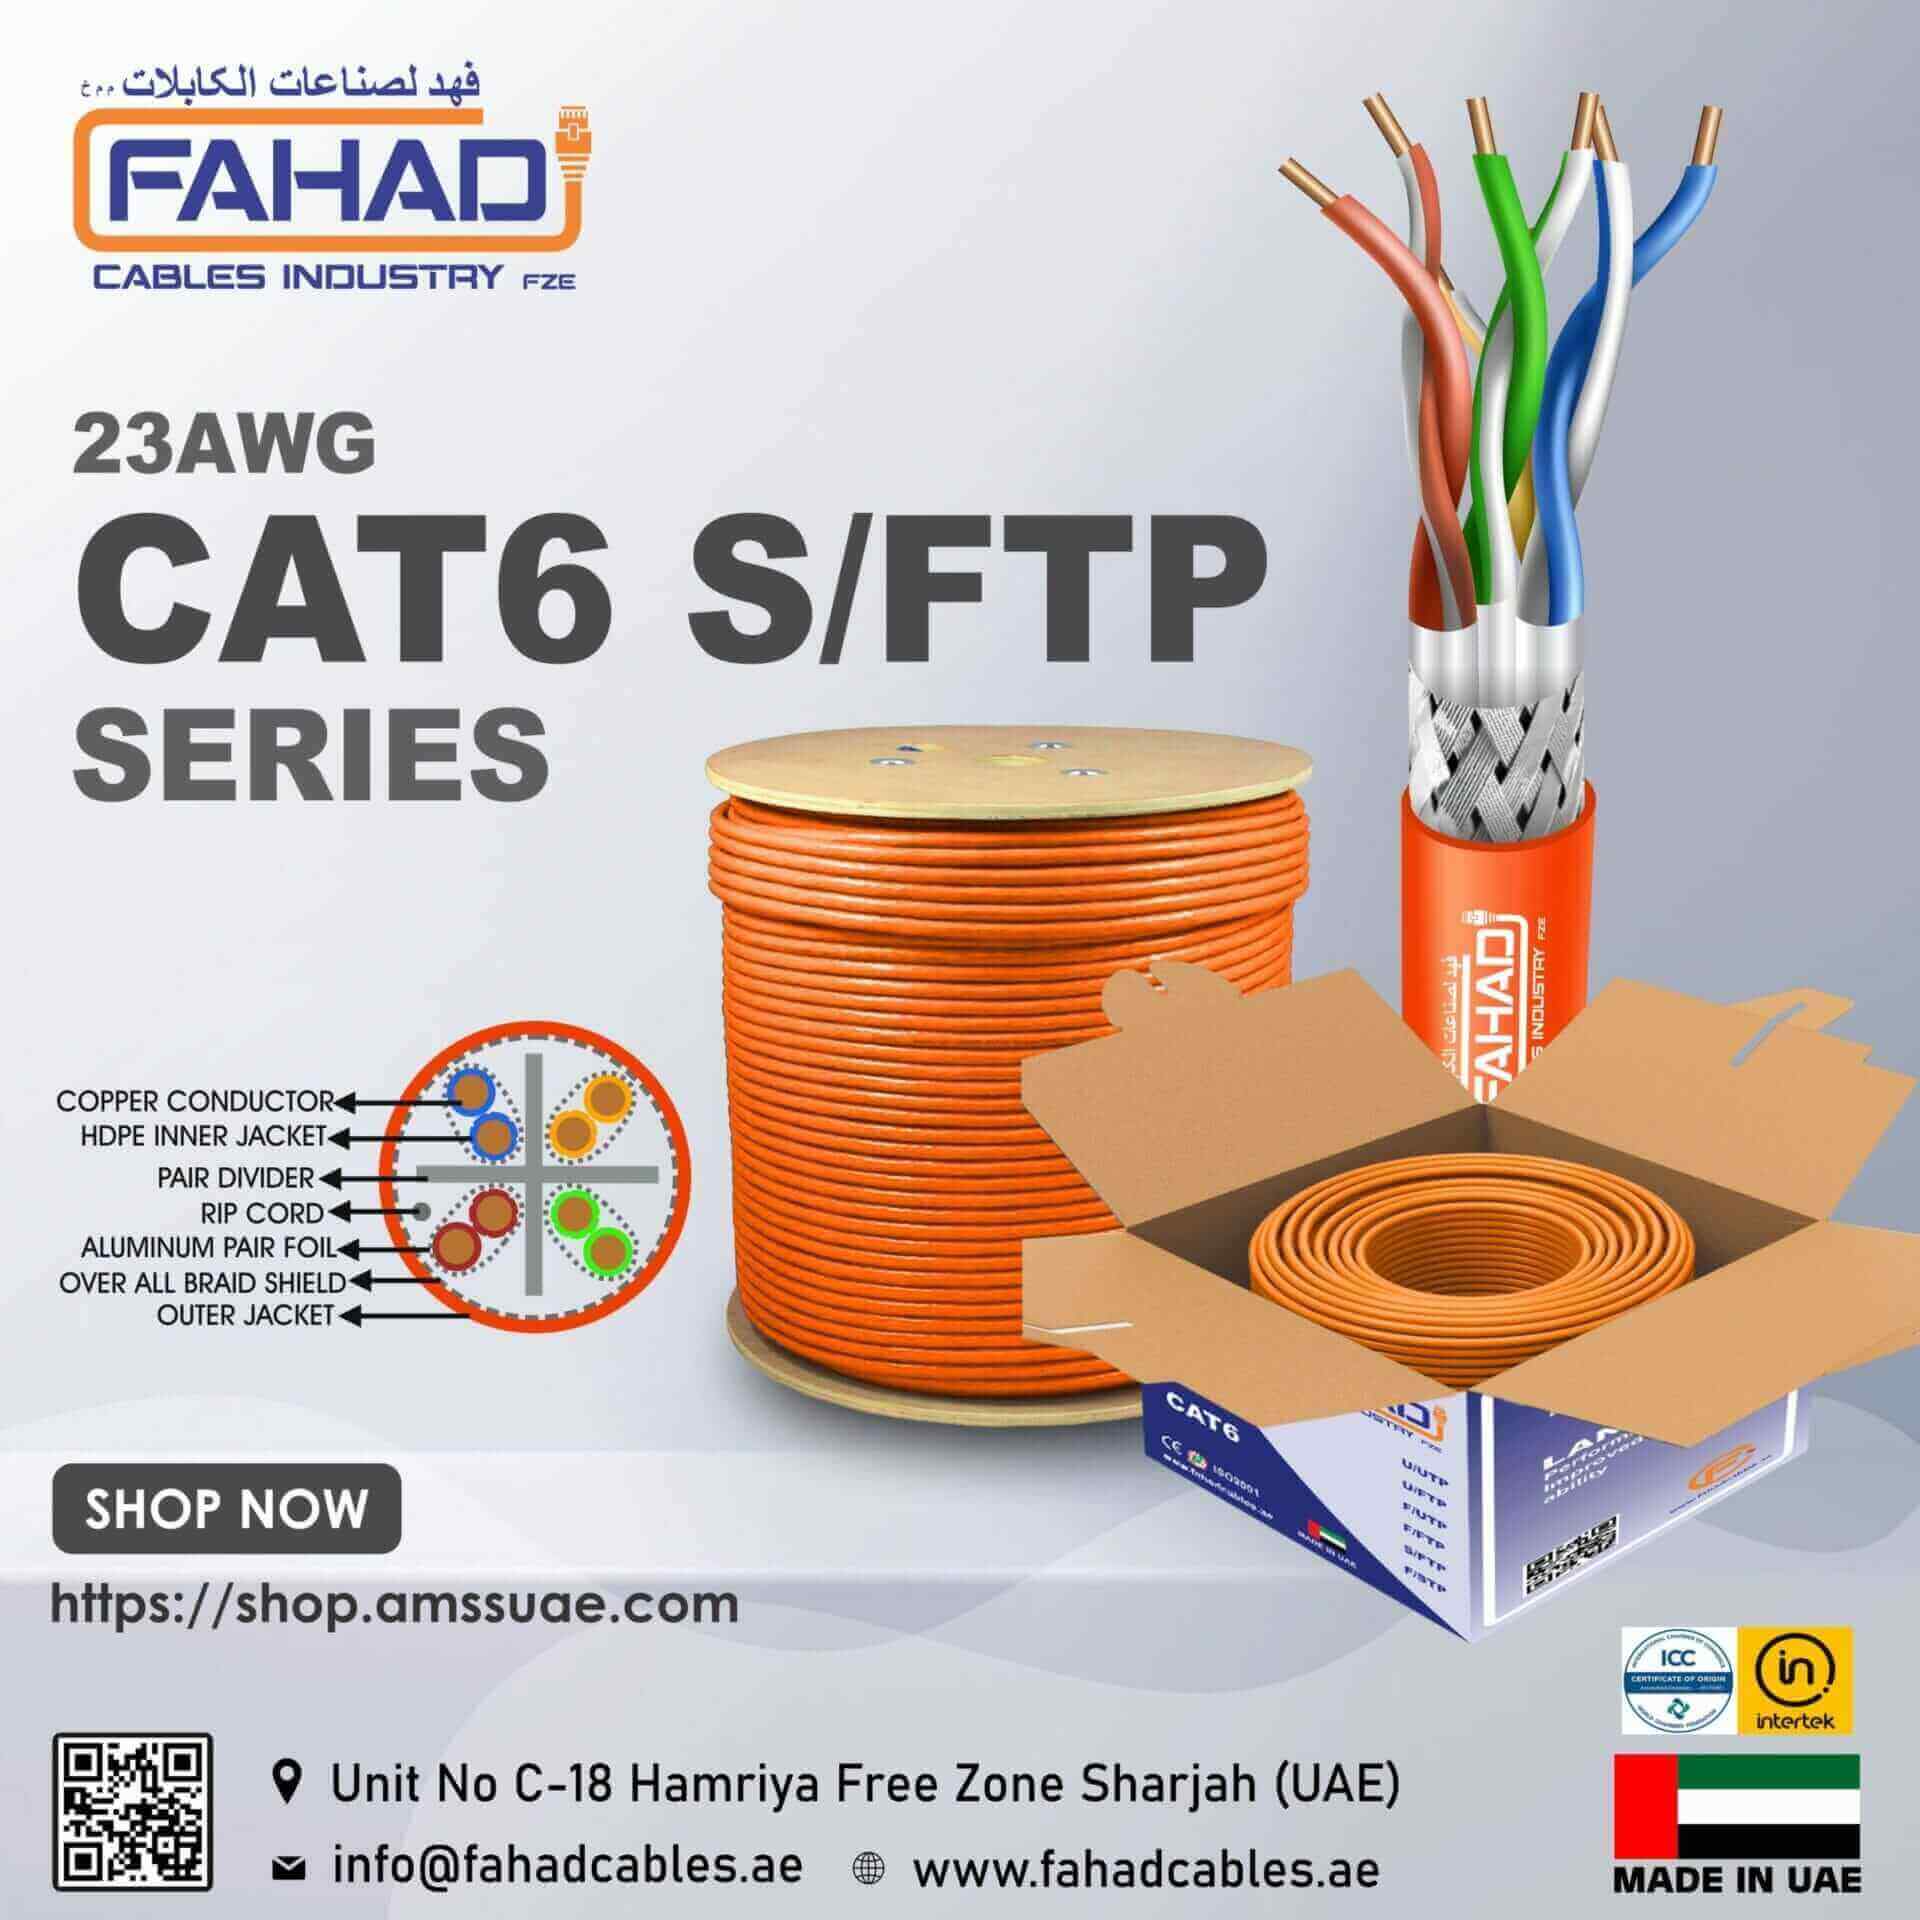 elv cable, tmt global, tmt, fahad cables industry fze, ethernet cable, ethernet cable Cat6 23awg Shielded Twisted Foil Sftp Series